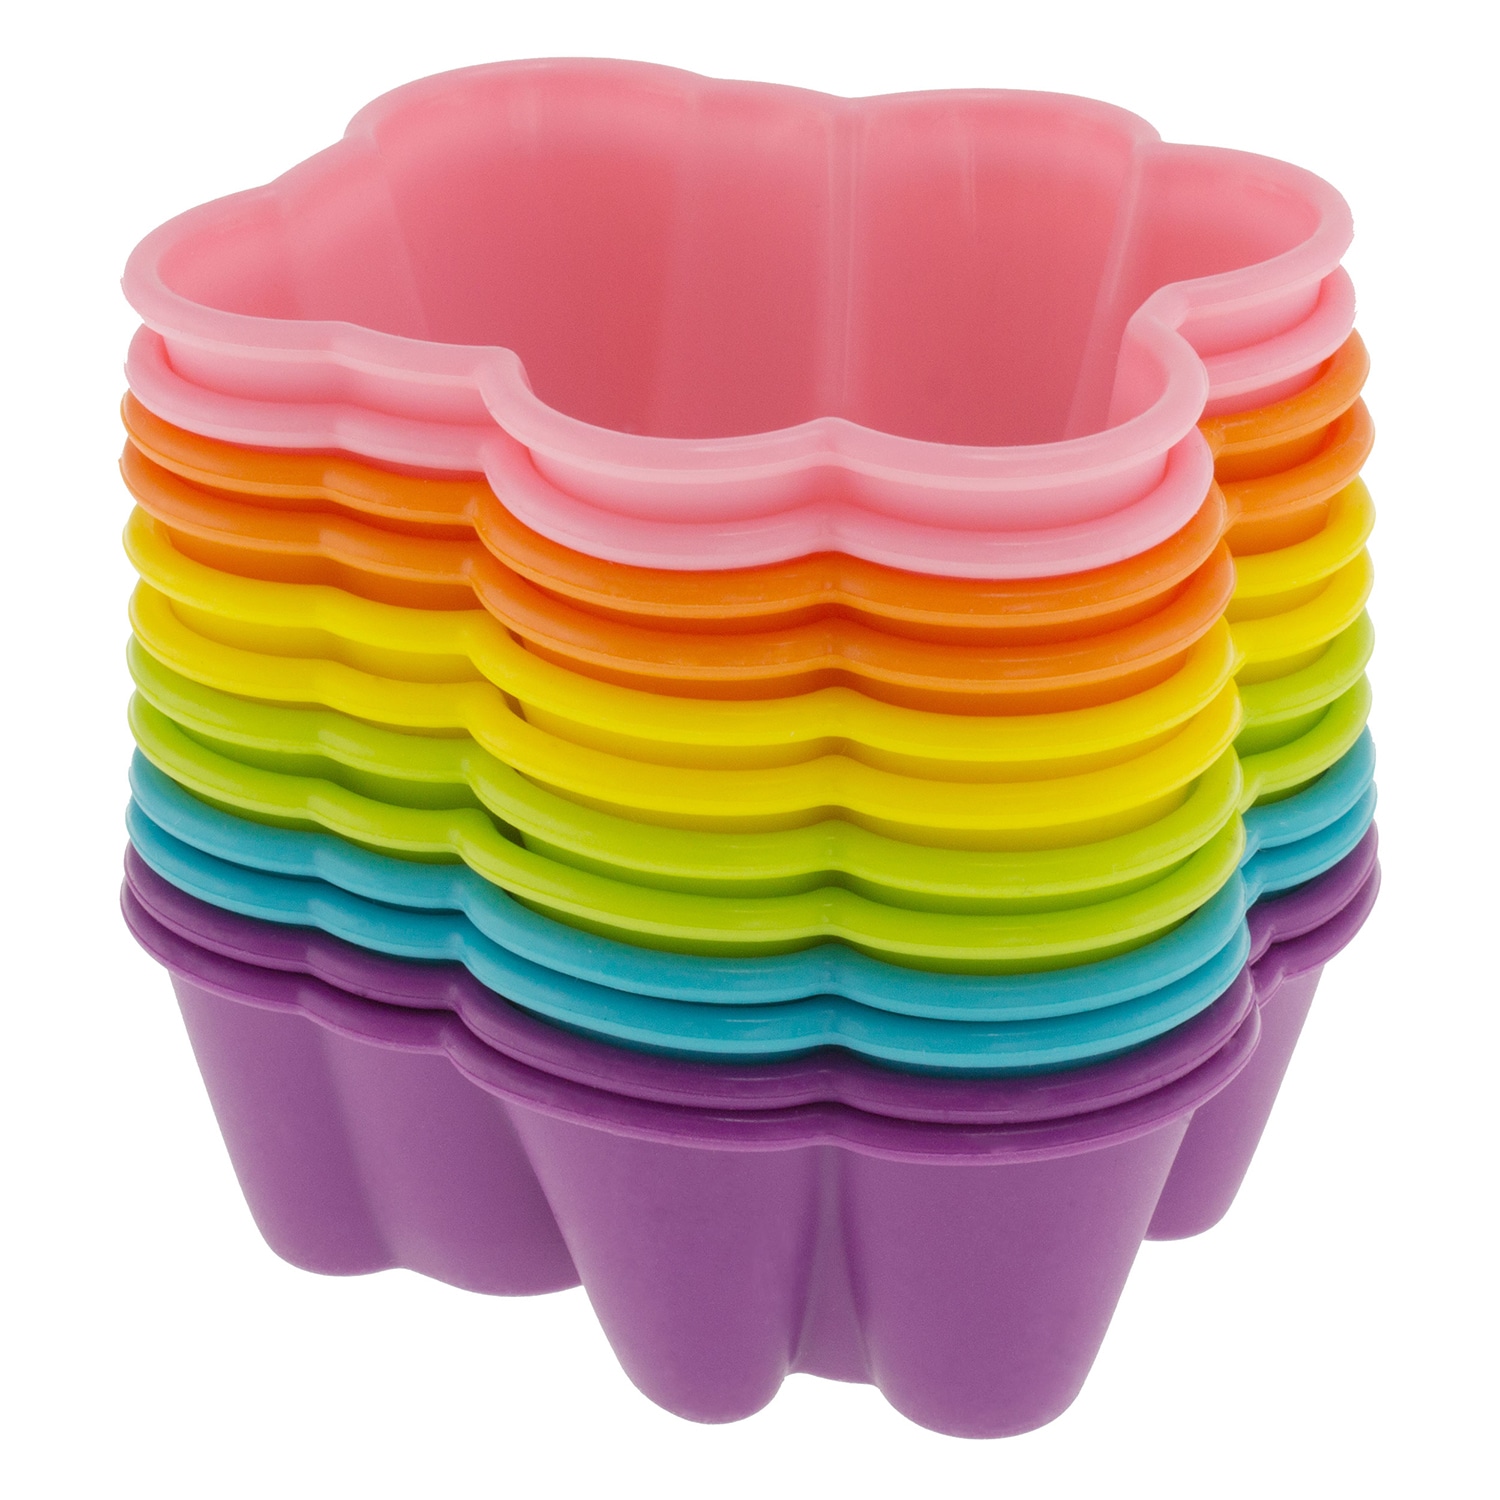 https://ak1.ostkcdn.com/images/products/10480169/Freshware-12-pack-Silicone-Bear-Reusable-Cupcake-and-Muffin-Baking-Cup-d3d6eb0e-1de8-478f-842d-dd8805c0510f.jpg